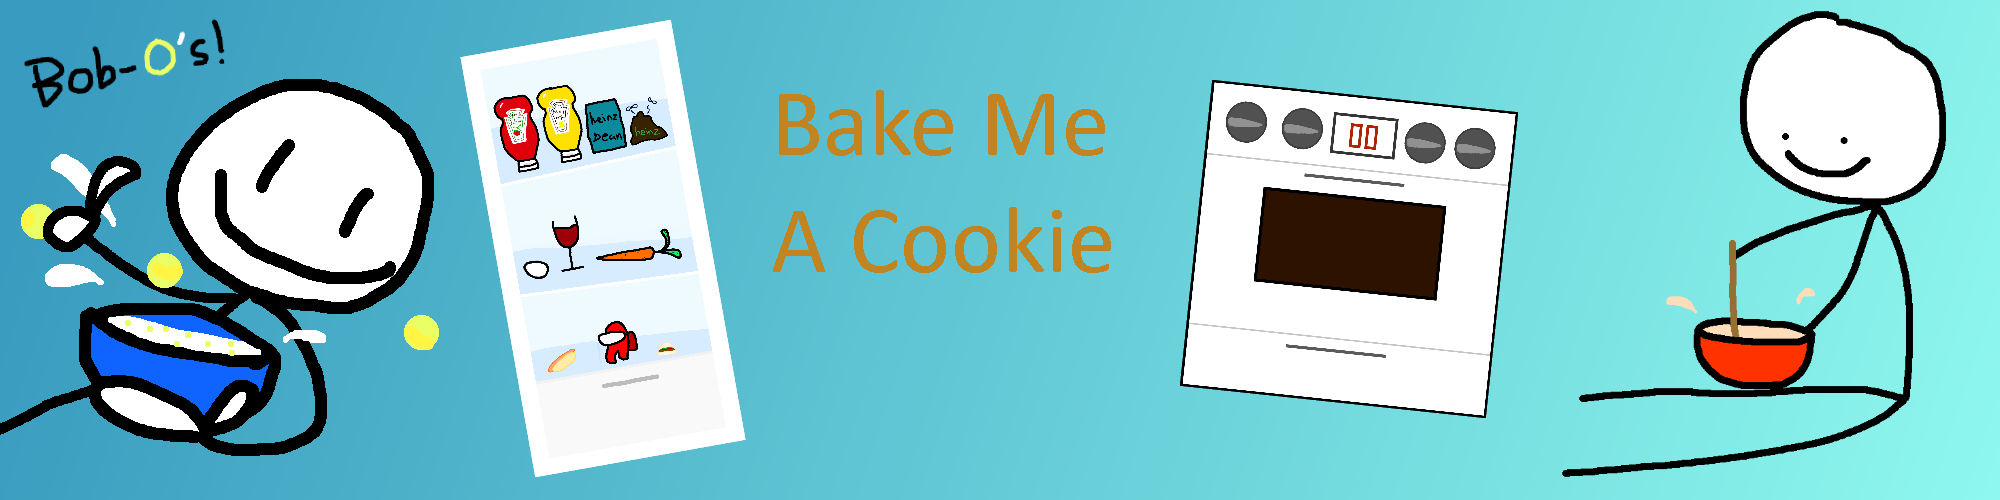 Bake Me a Cookie!!!